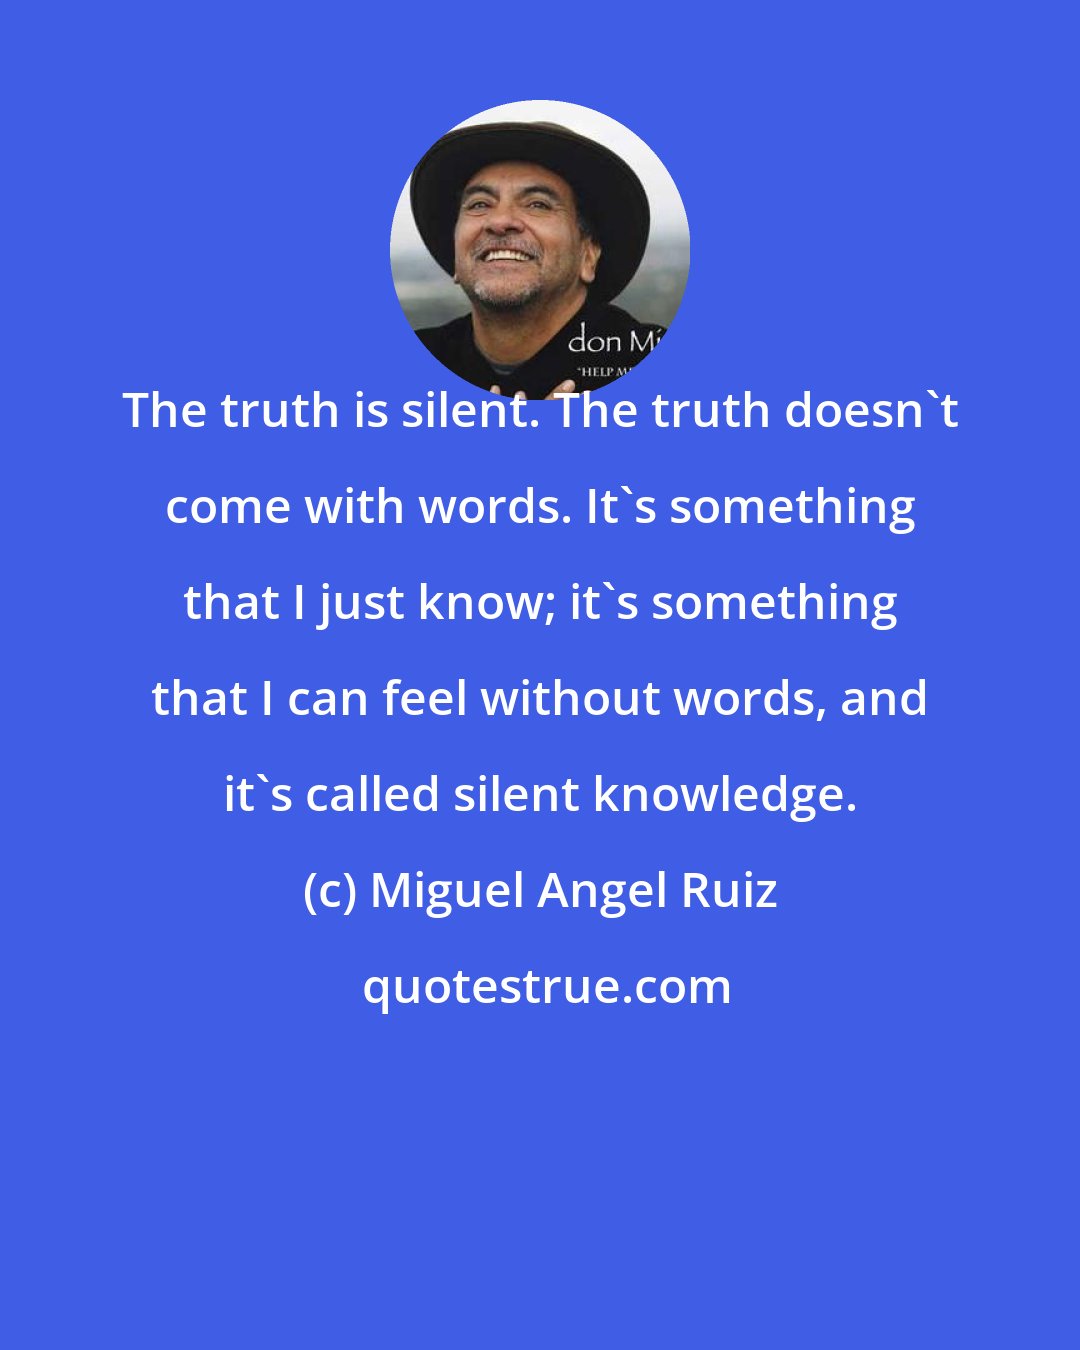 Miguel Angel Ruiz: The truth is silent. The truth doesn't come with words. It's something that I just know; it's something that I can feel without words, and it's called silent knowledge.